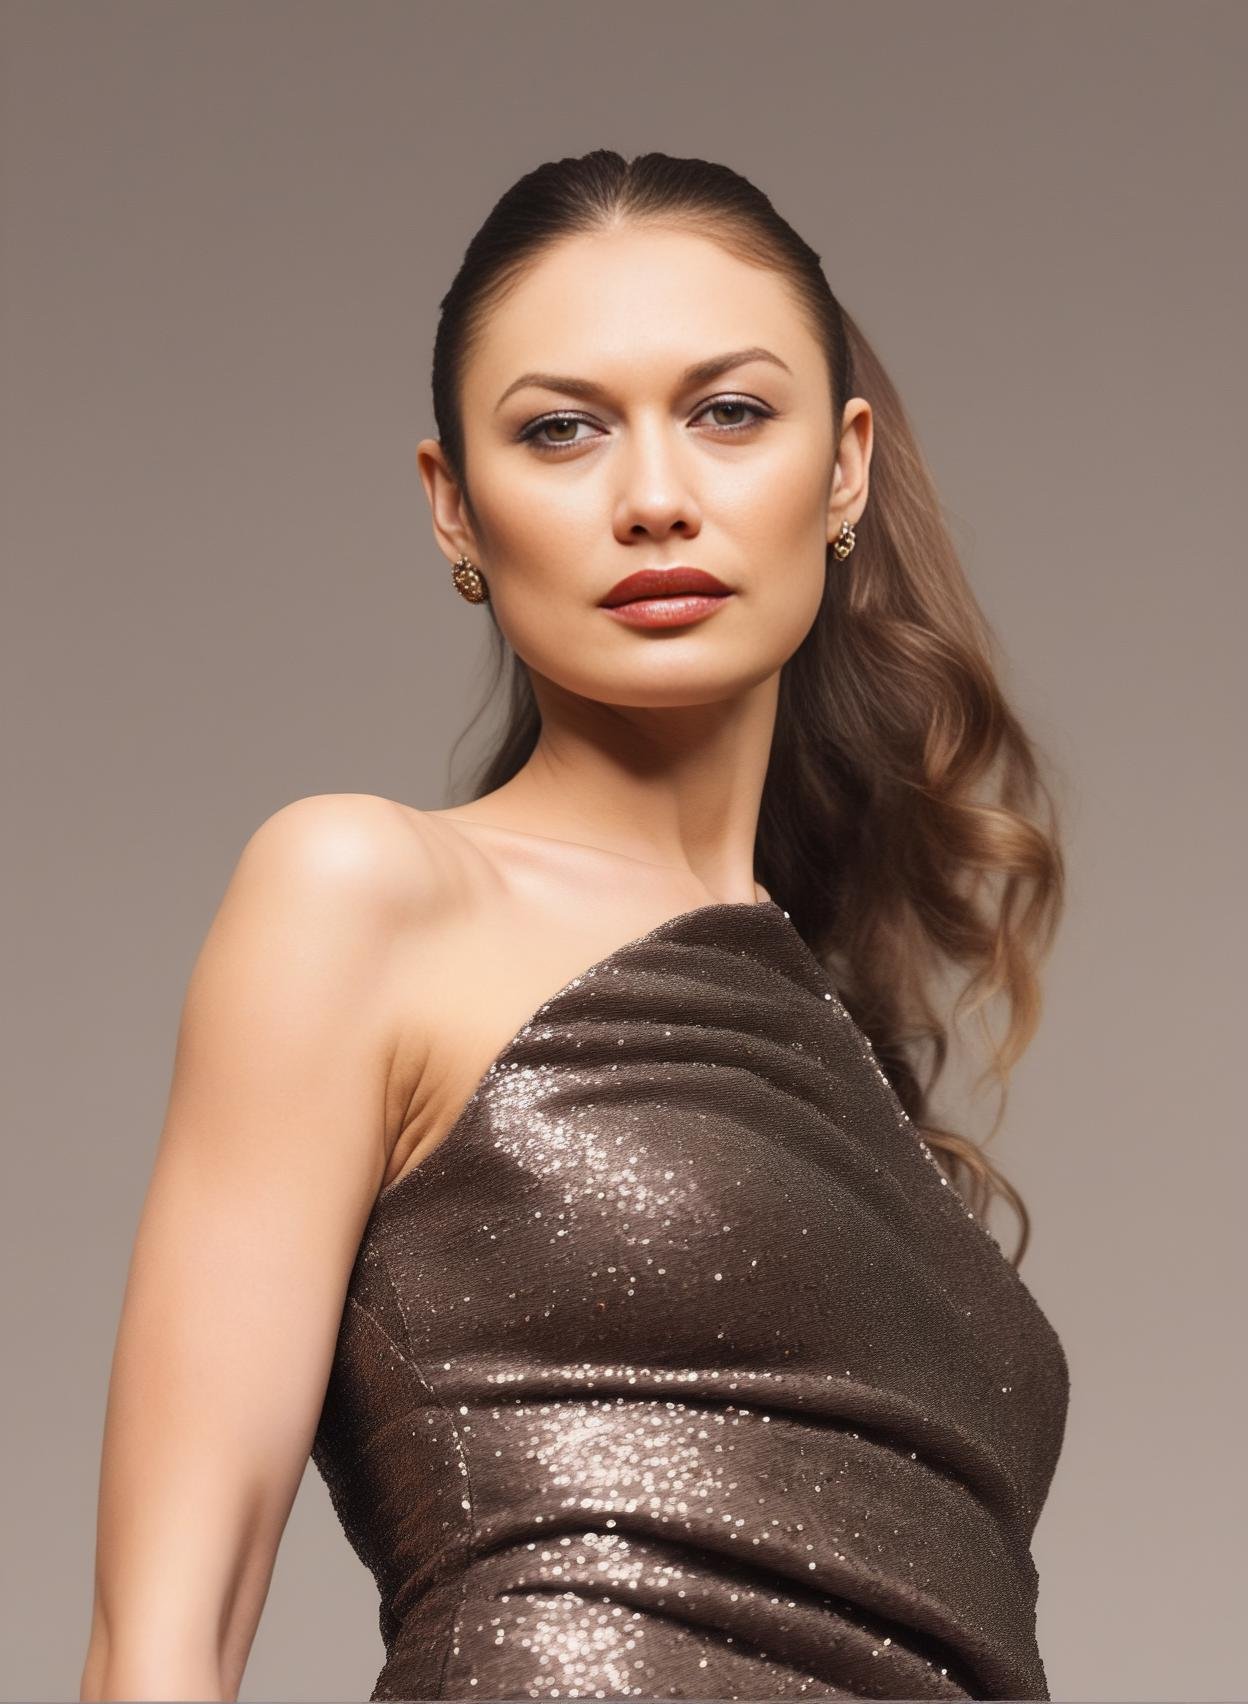 OlgaKostyantynivnaKurylenko,<lora:OlgaKostyantynivnaKurylenkoSDXL:1>The image features a beautiful woman wearing a dark grey sequin dress, which is adorned with bronze sequins. She is posing for the camera, with her hand on her chin, lipstick, and her long hair is styled in a ponytail. The woman appears to be confident and poised, showcasing her elegant attire and striking appearance.